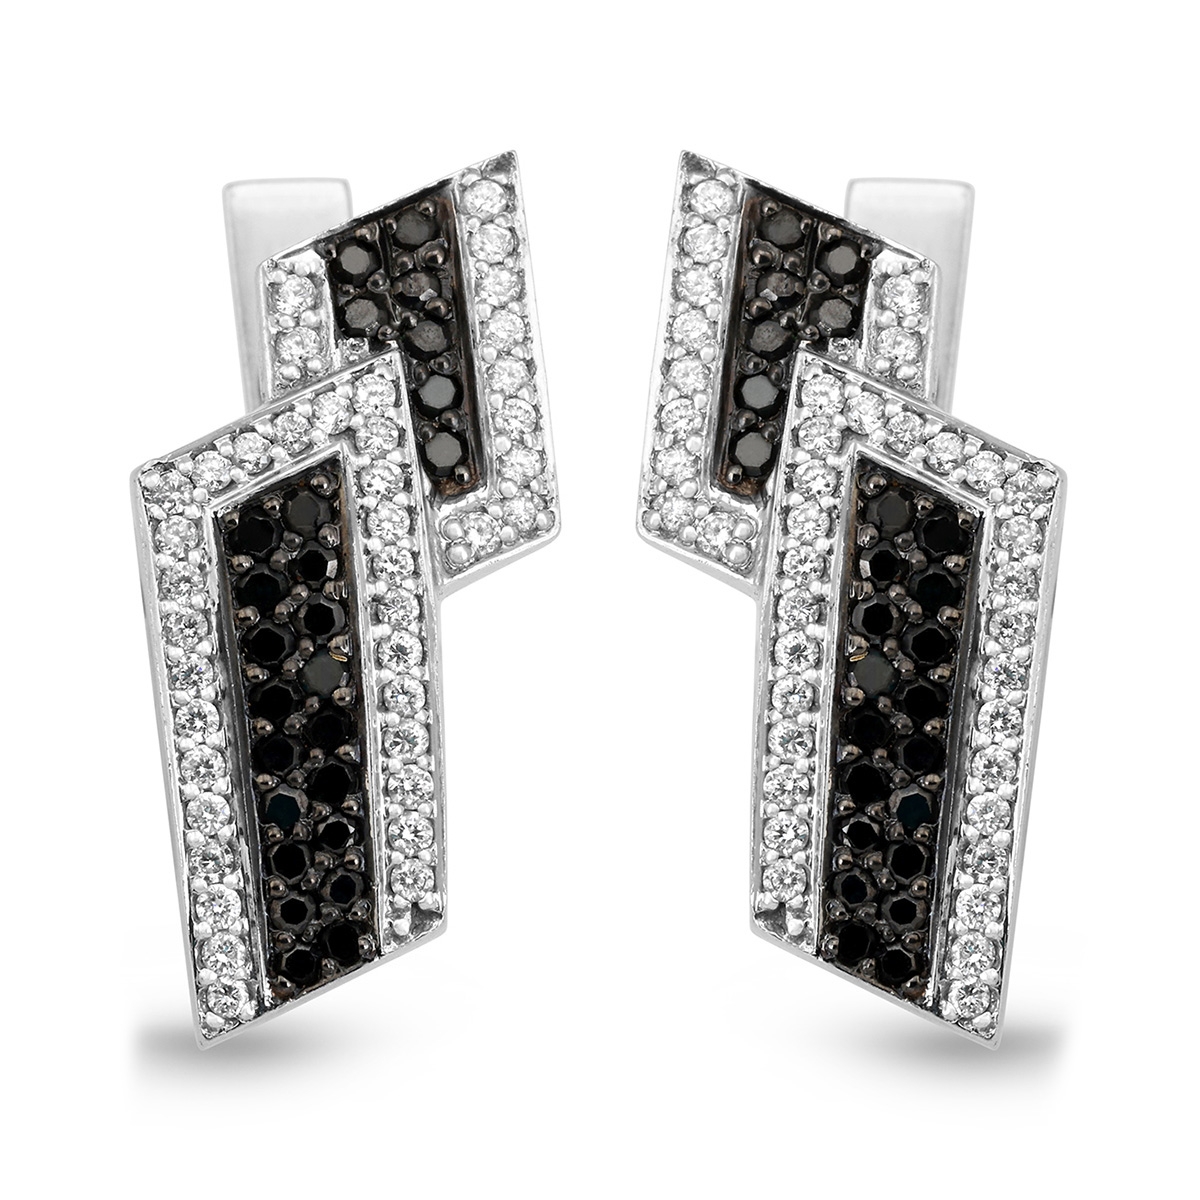 Anbinder 14K White Gold Overlapping Block Earrings with Diamonds - 1